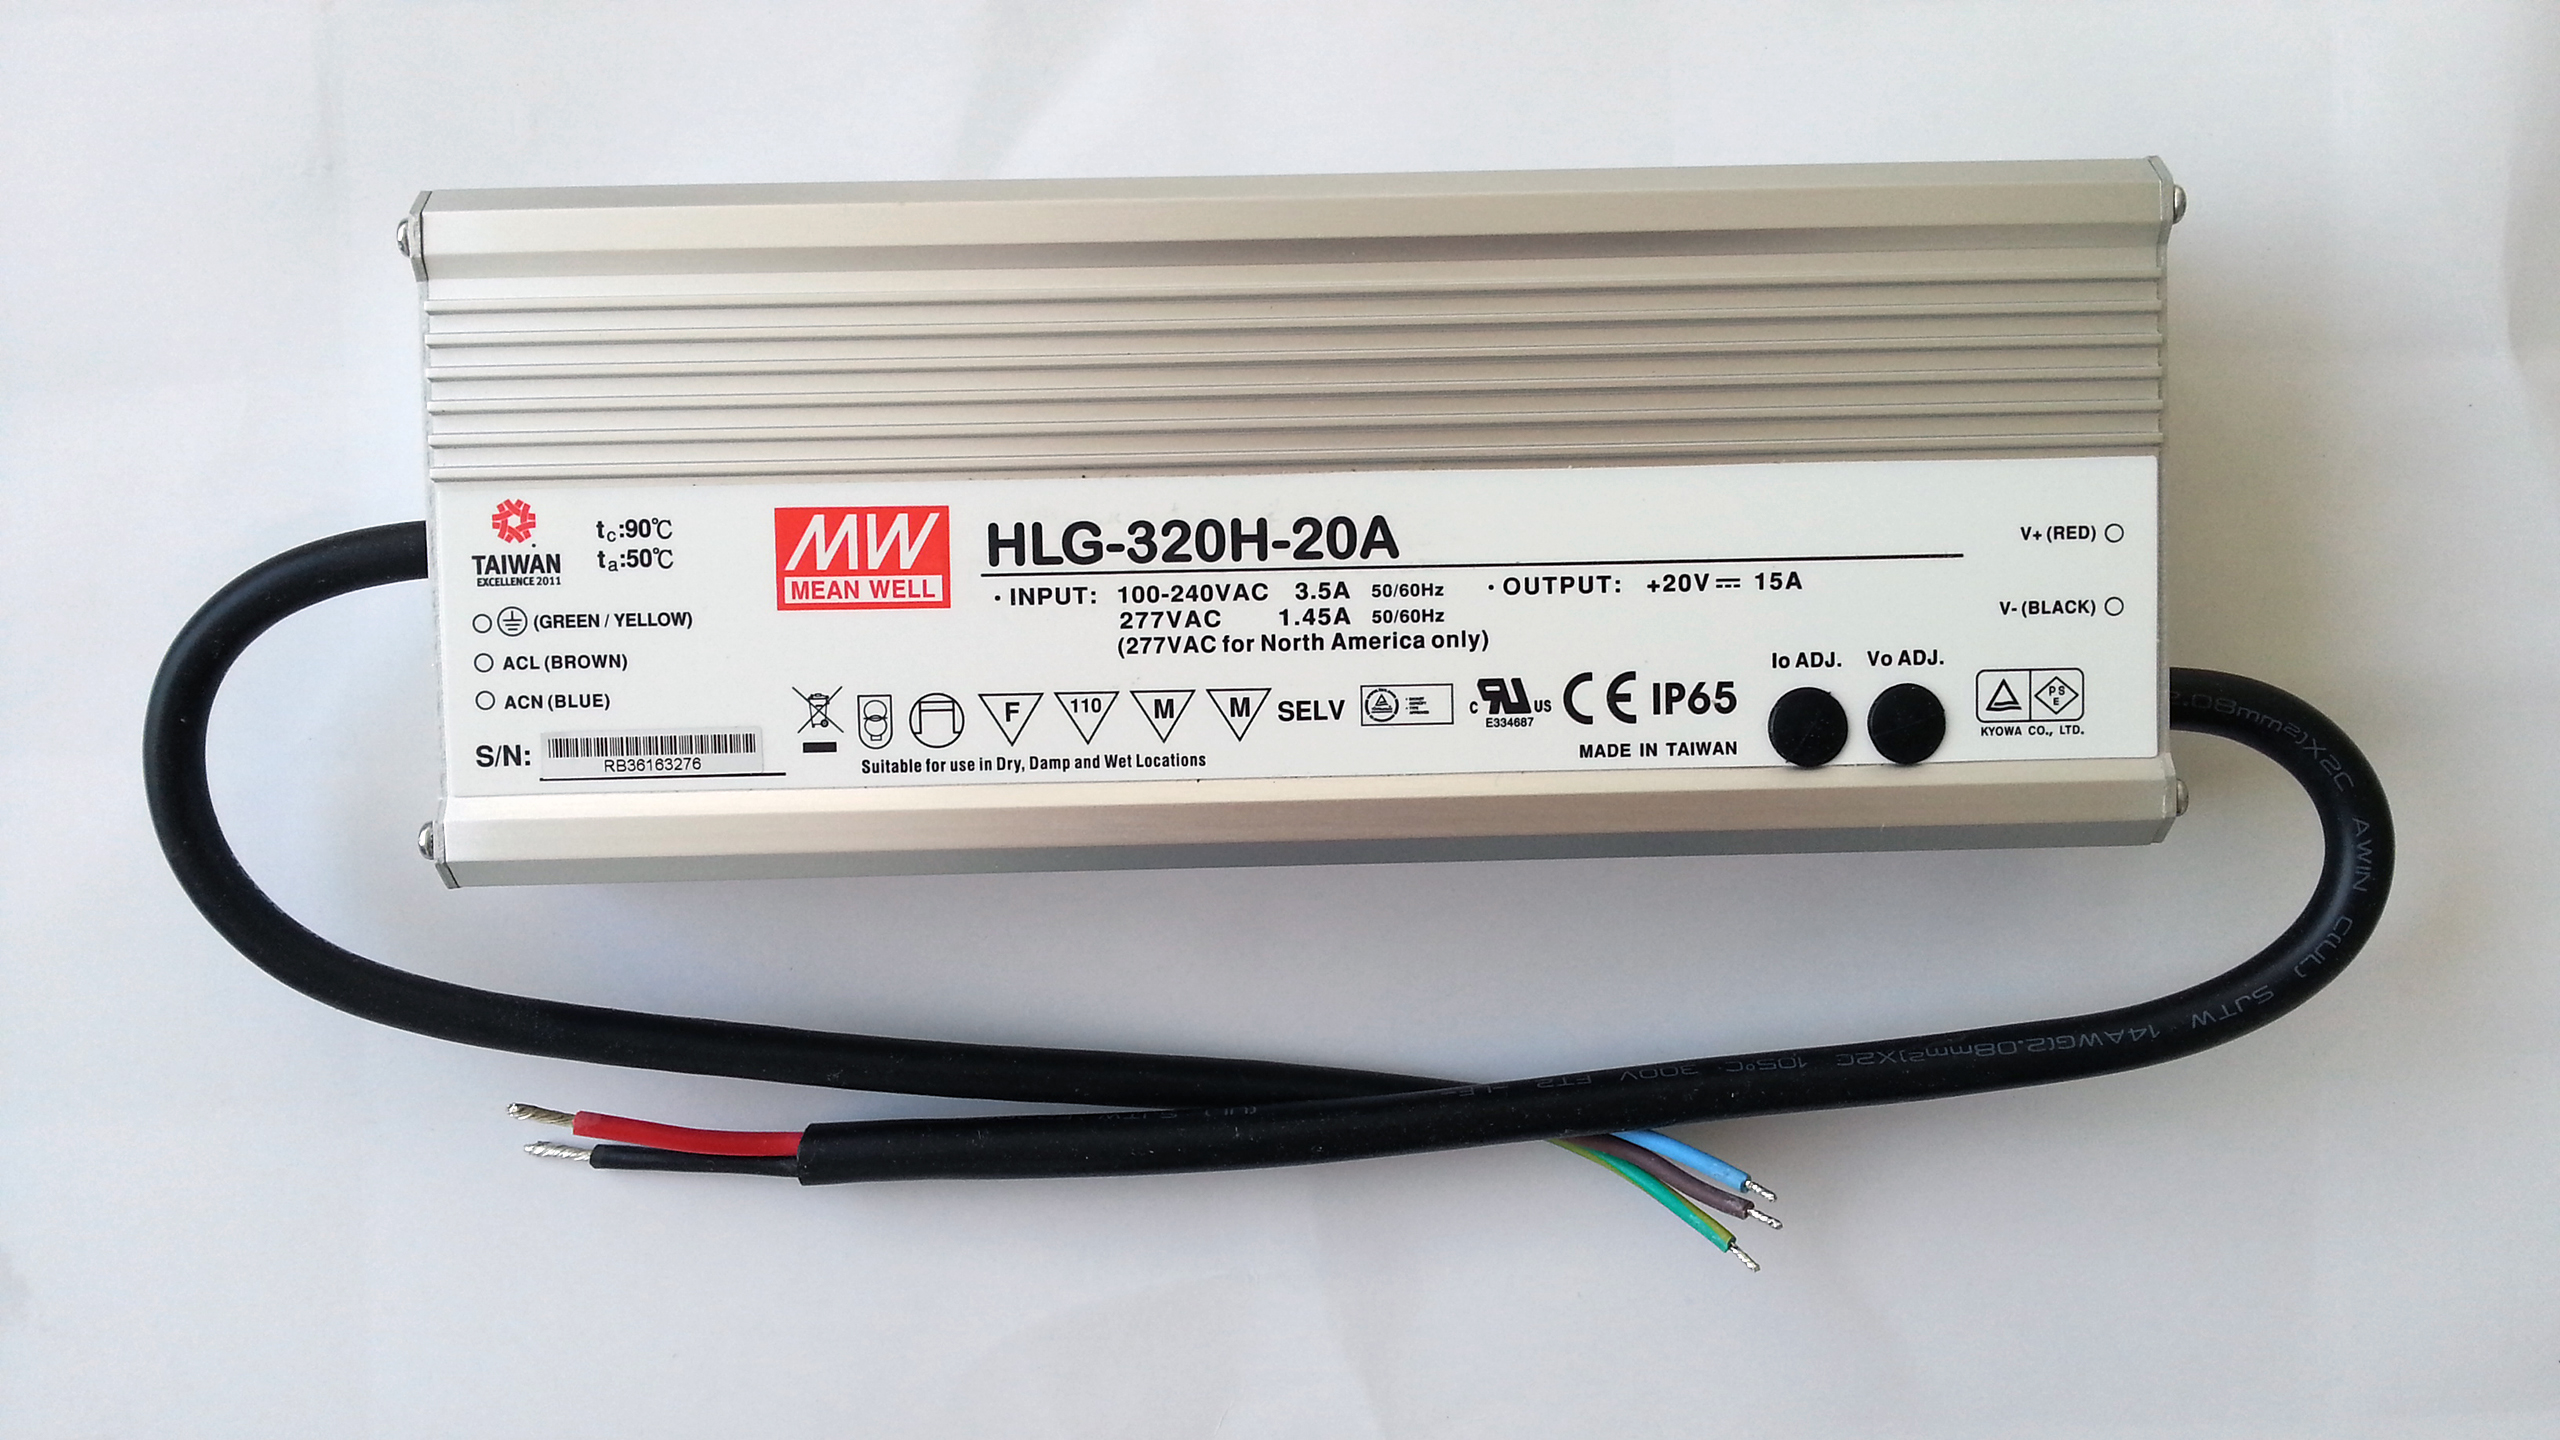 Meanwell_dimmable_waterproof_HLG_320H_20A_LED_driver_power_supply